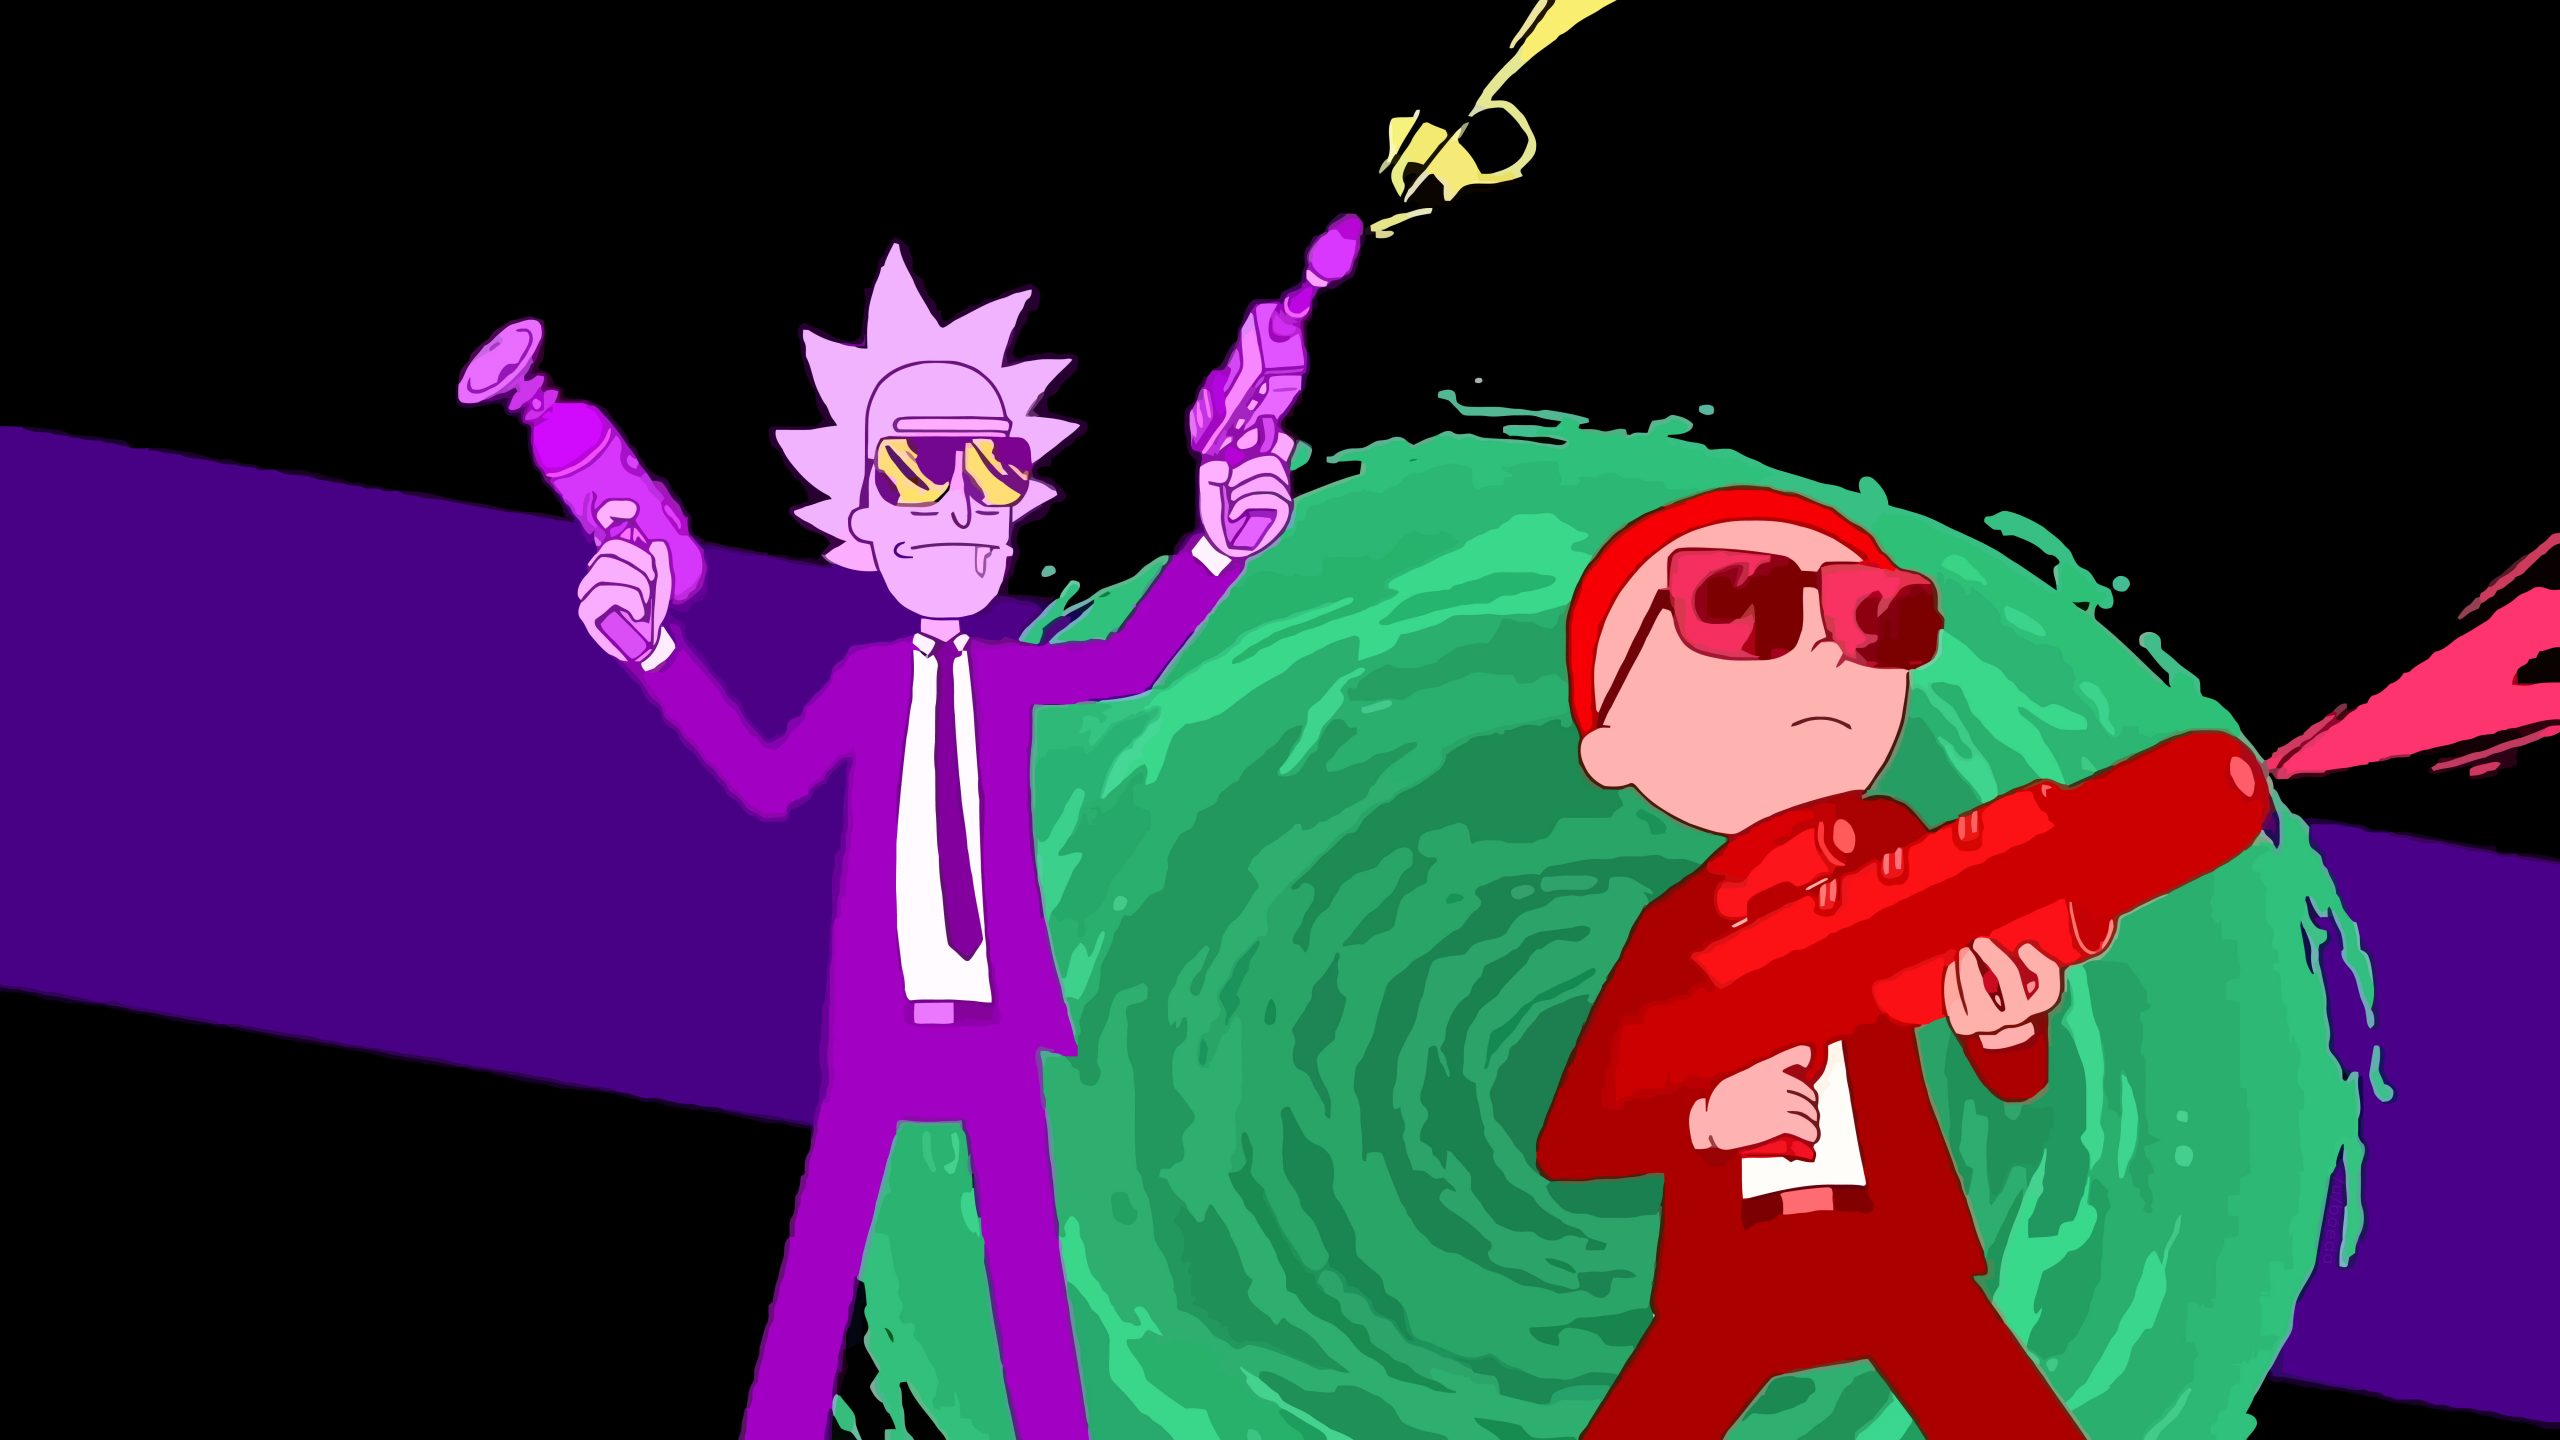 Wallpaper Rick And Morty, Run The Jewels, Vector Graphics